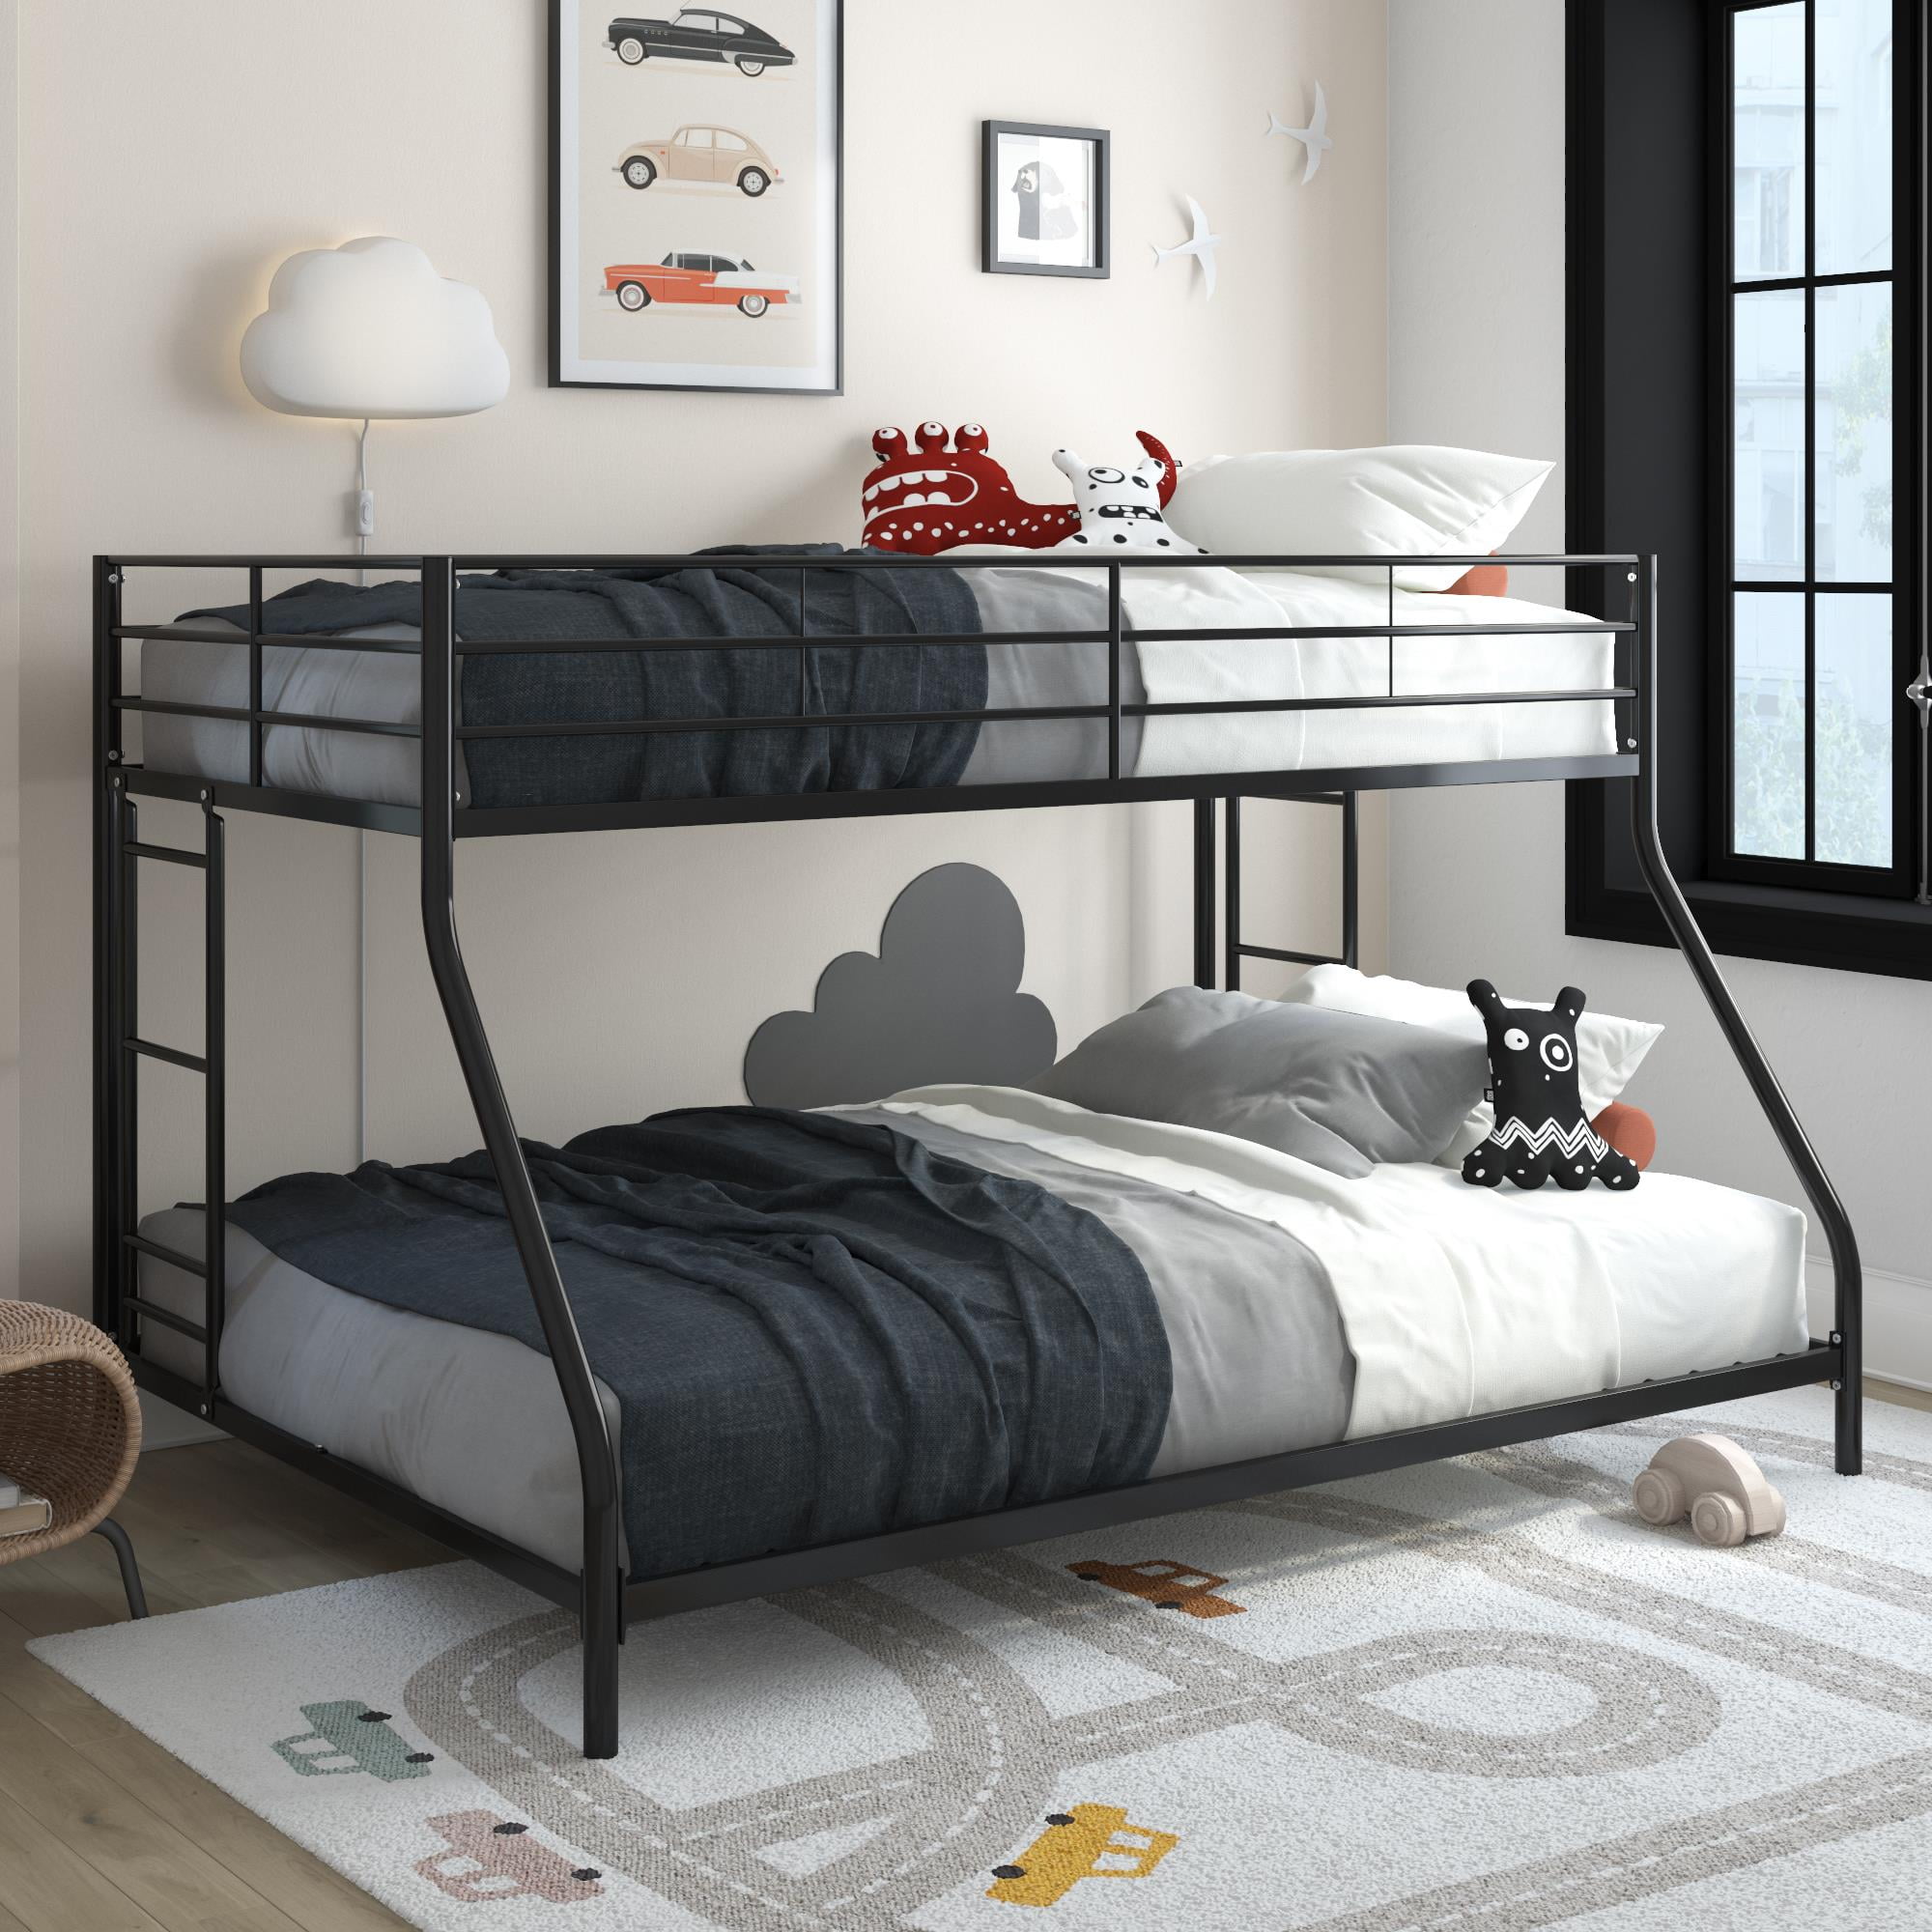 Mainstays Small Space Junior Twin Over, Bunk Beds For Tall People